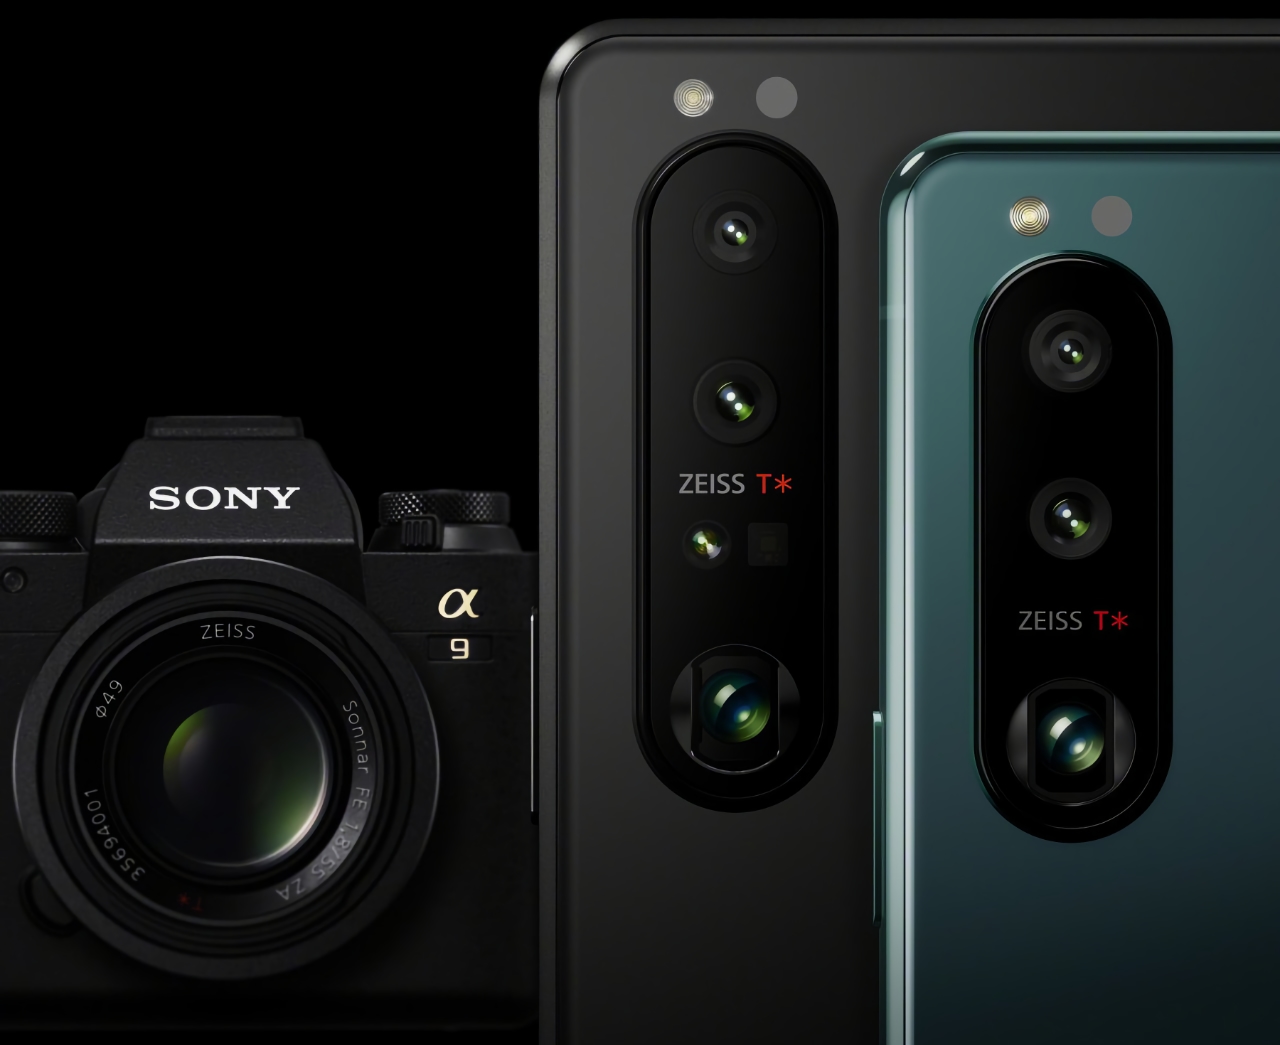 Sony unveiled Xperia 1 III and Xperia 5 III: a flagship range of devices with advanced cameras and 120 Hz screens